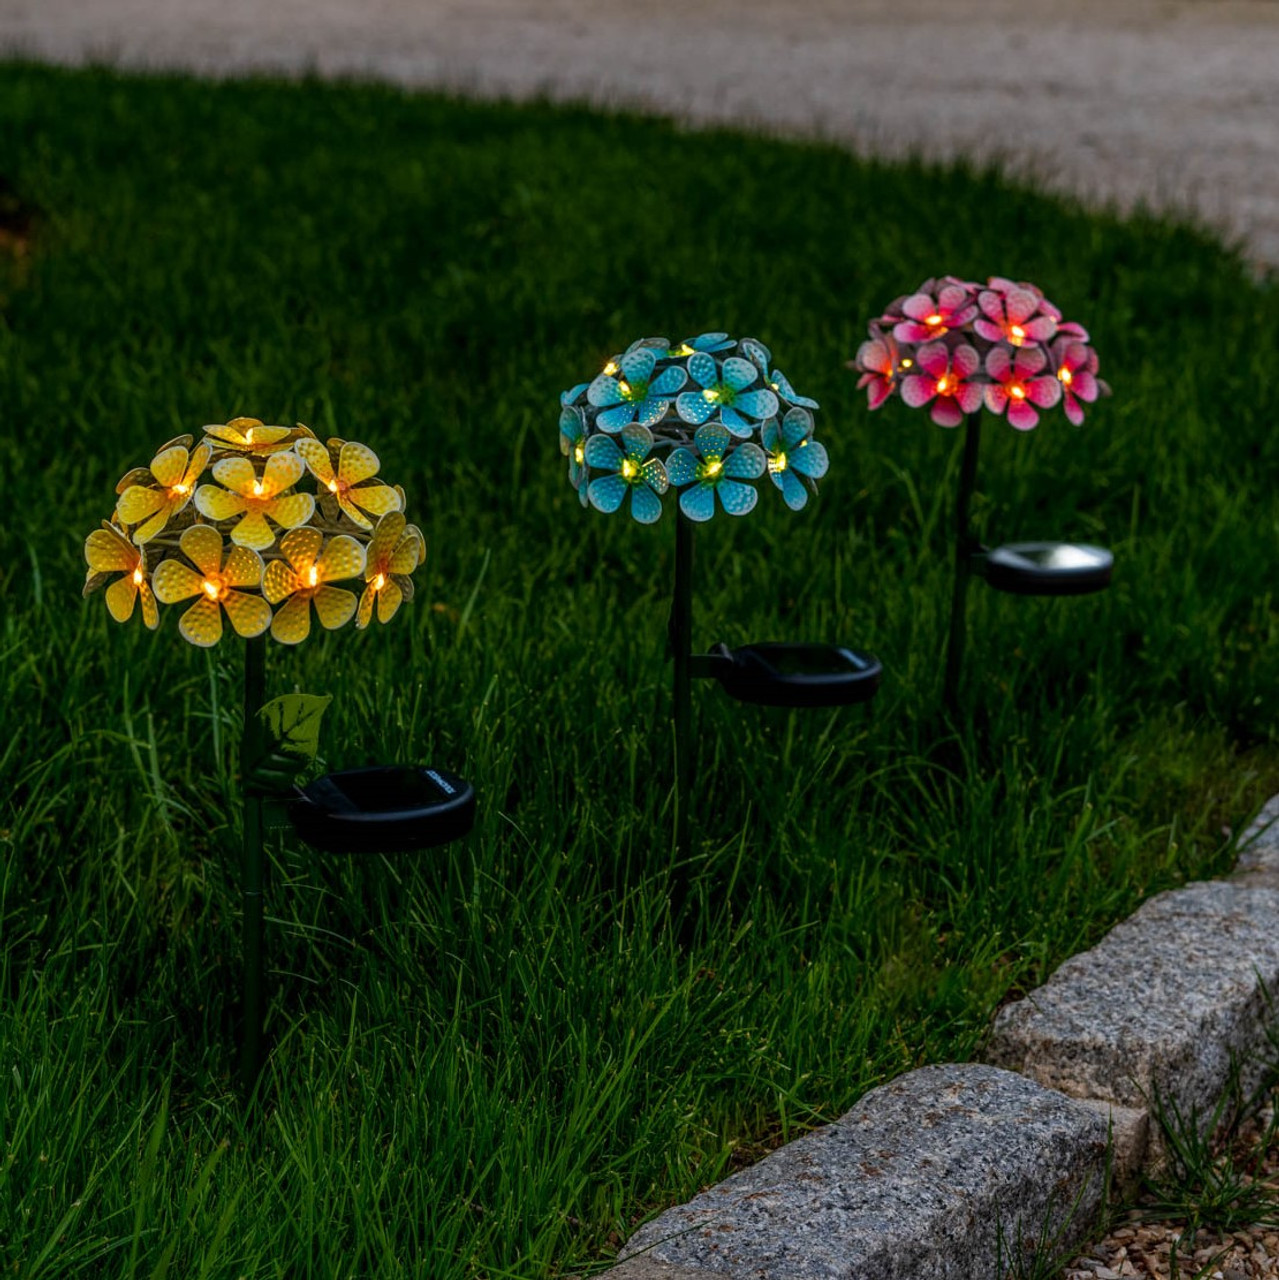 FLORALITES: Solar LED Metal Flower Décor Stake Light (1- to 3-Pack) product image